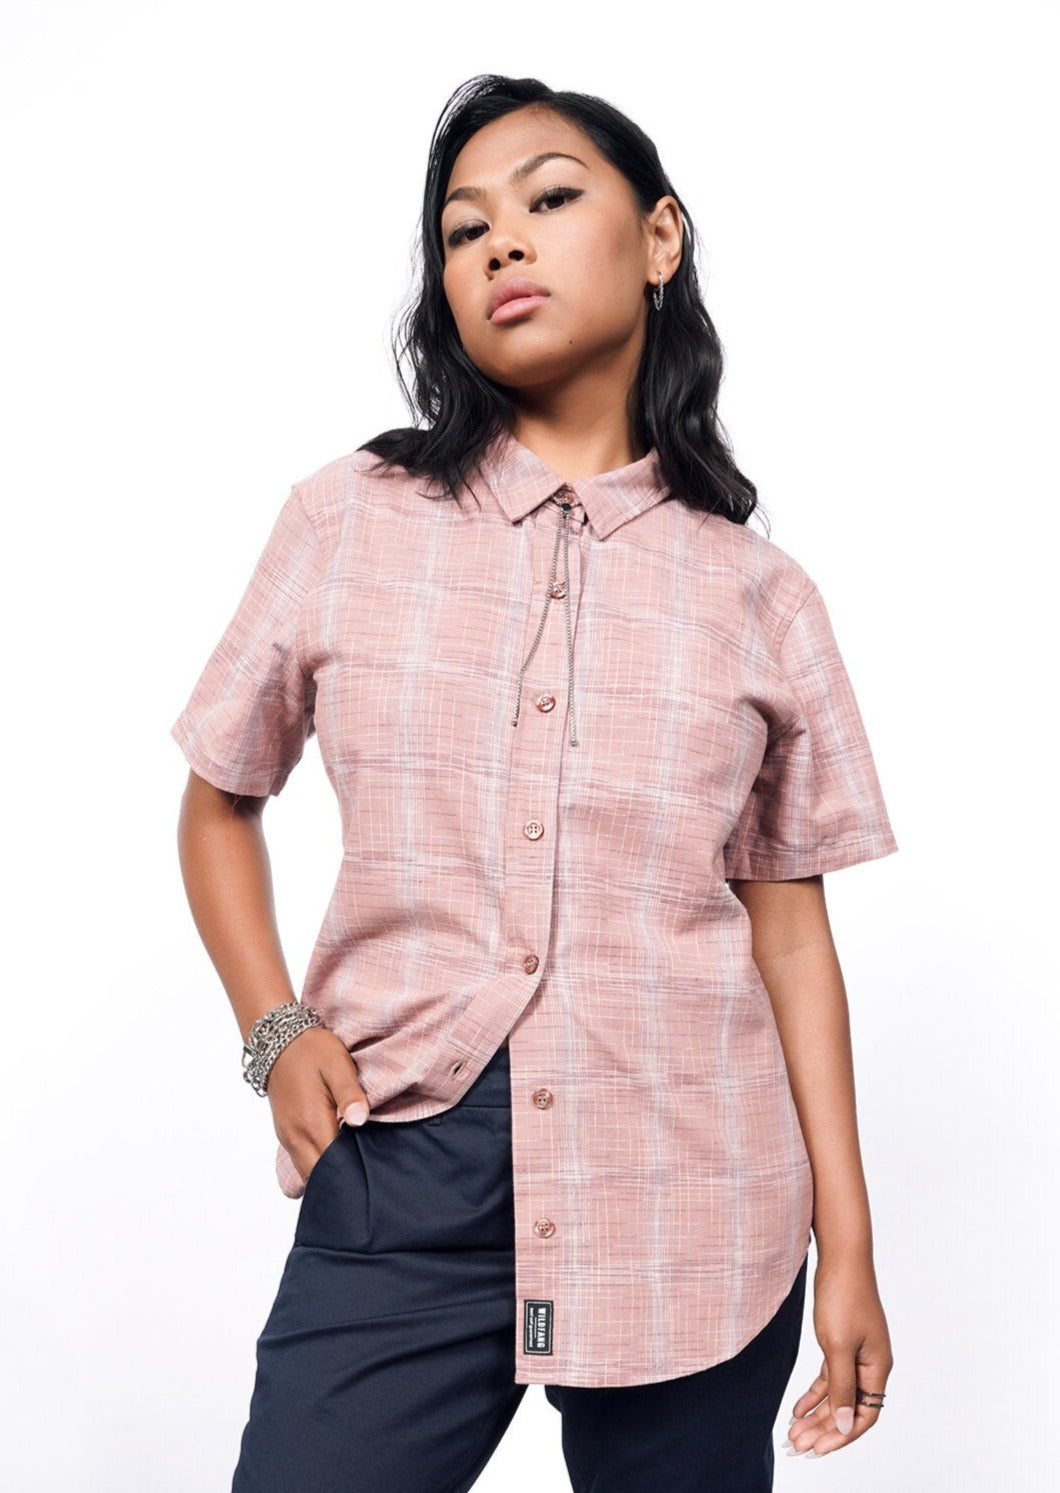 Model wearing The Essential Button Up in Cross Hatch Periwinkle